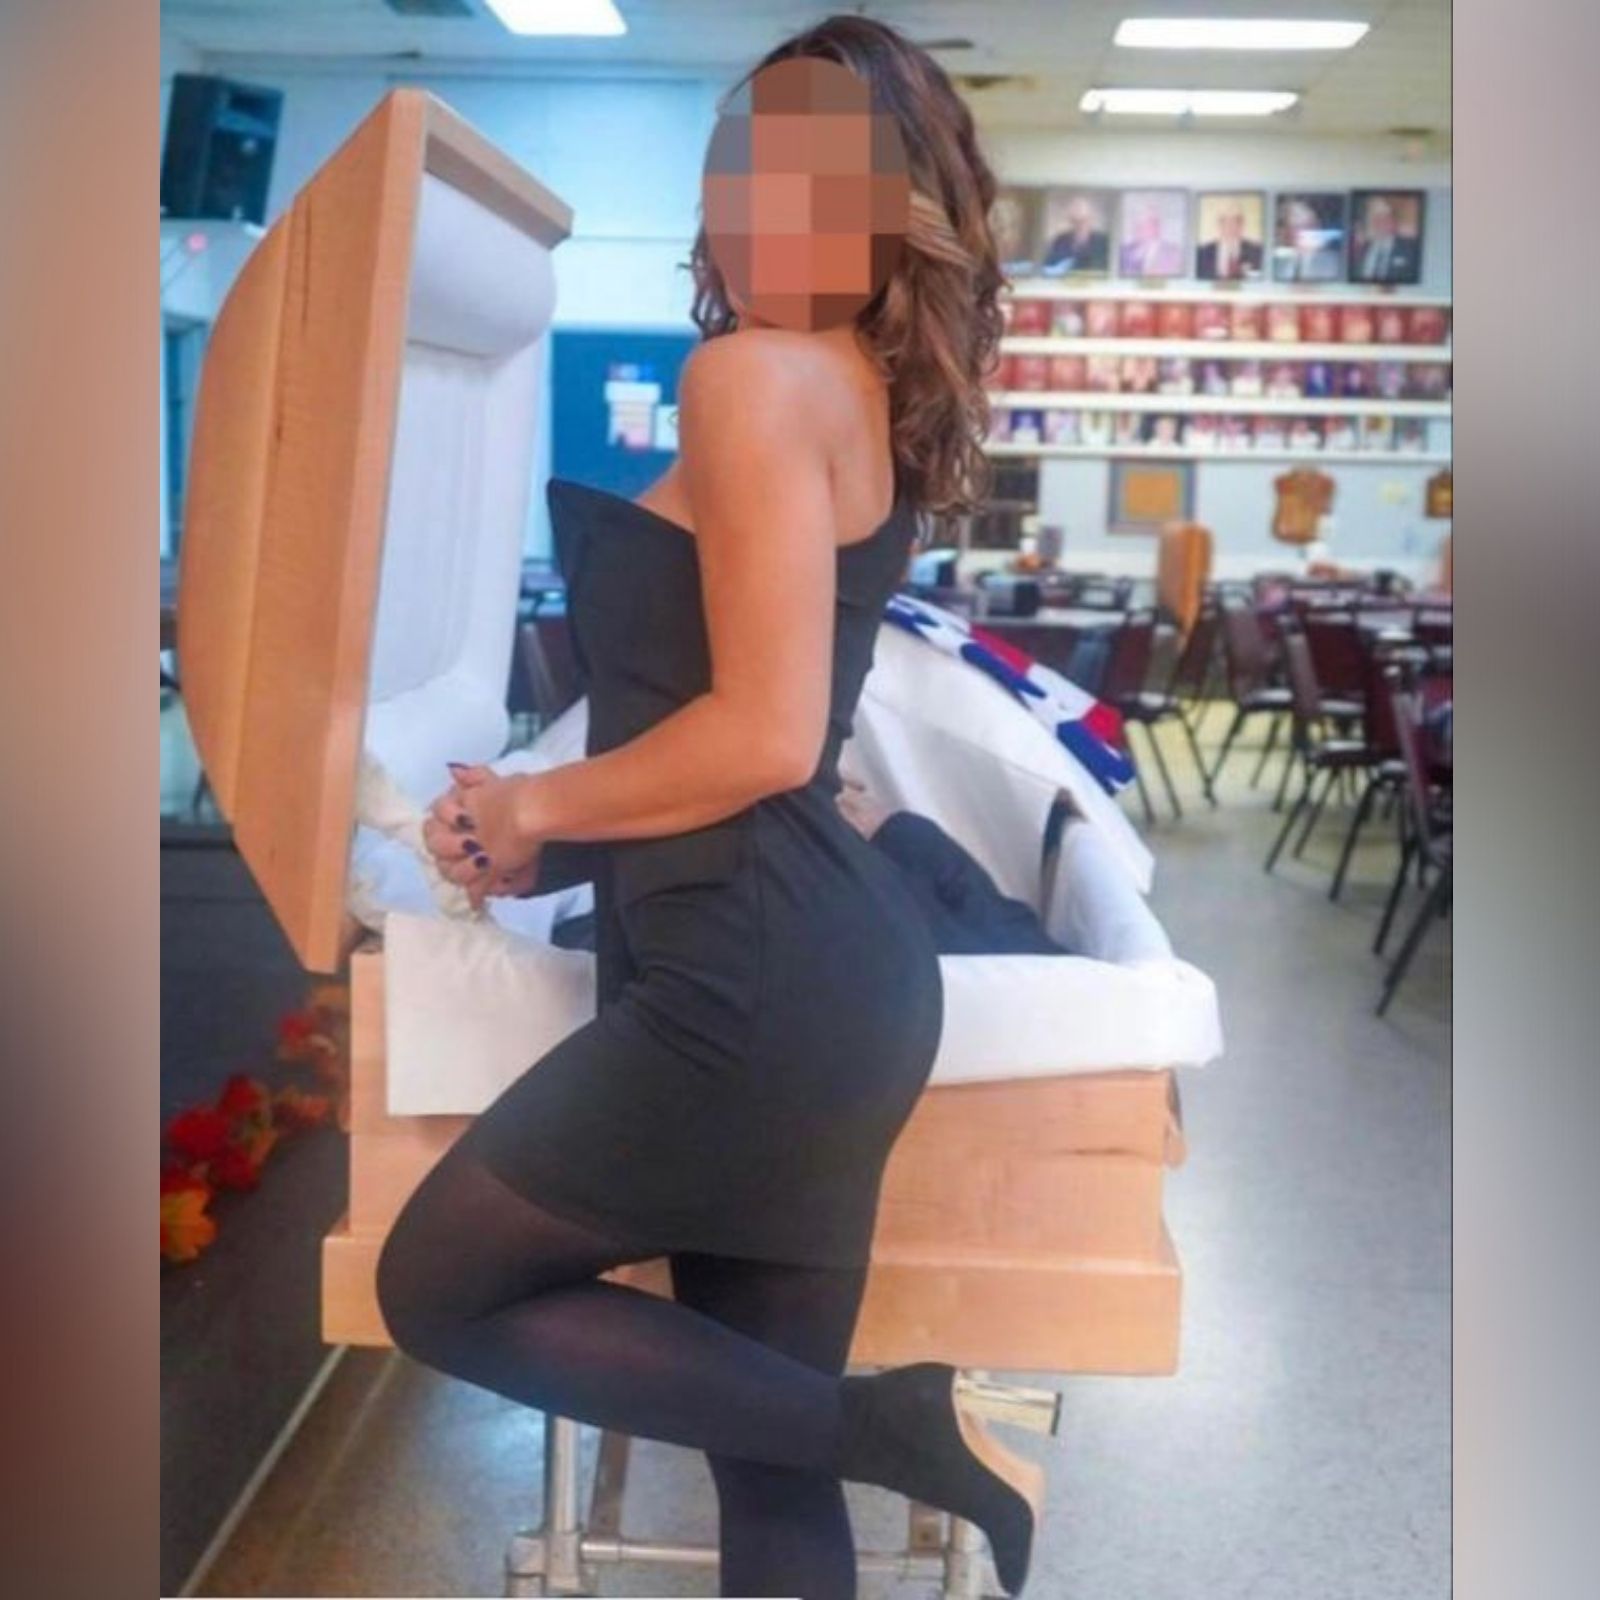 woman shares photo in glamourous pose in front of father dead body